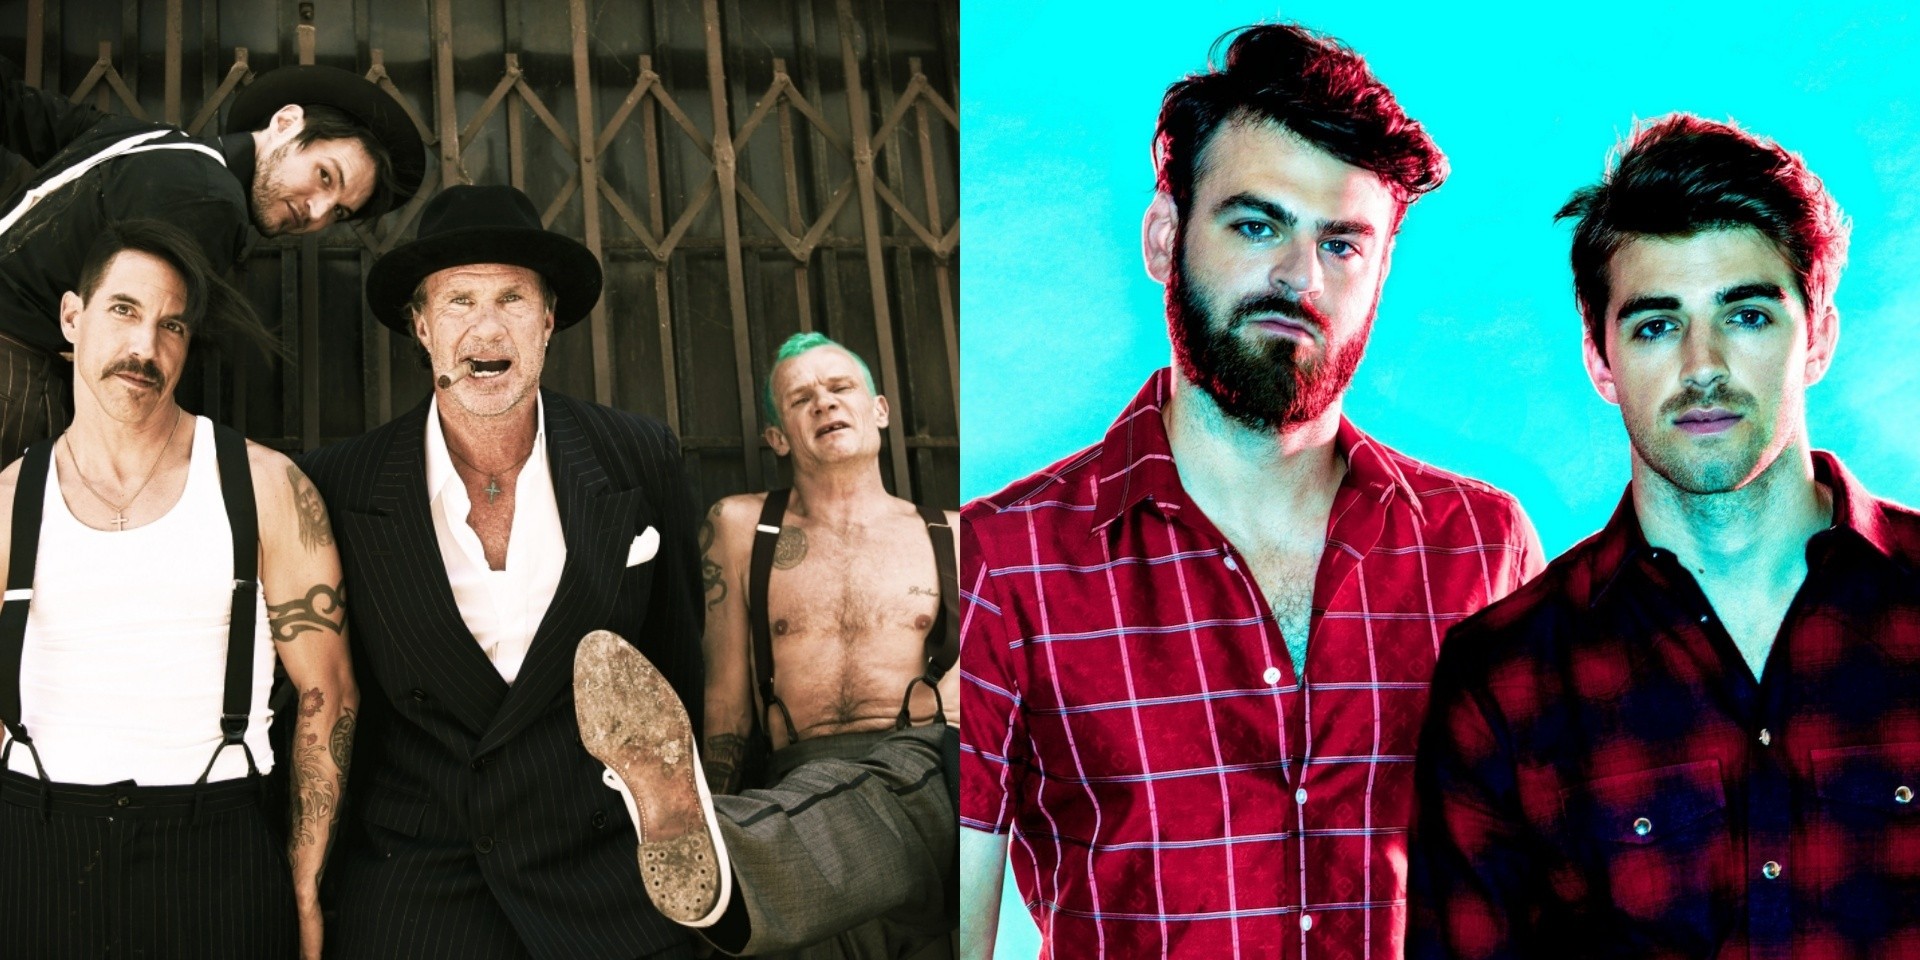 Red Hot Chili Peppers, The Chainsmokers and B'z to headline Summer Sonic 2019